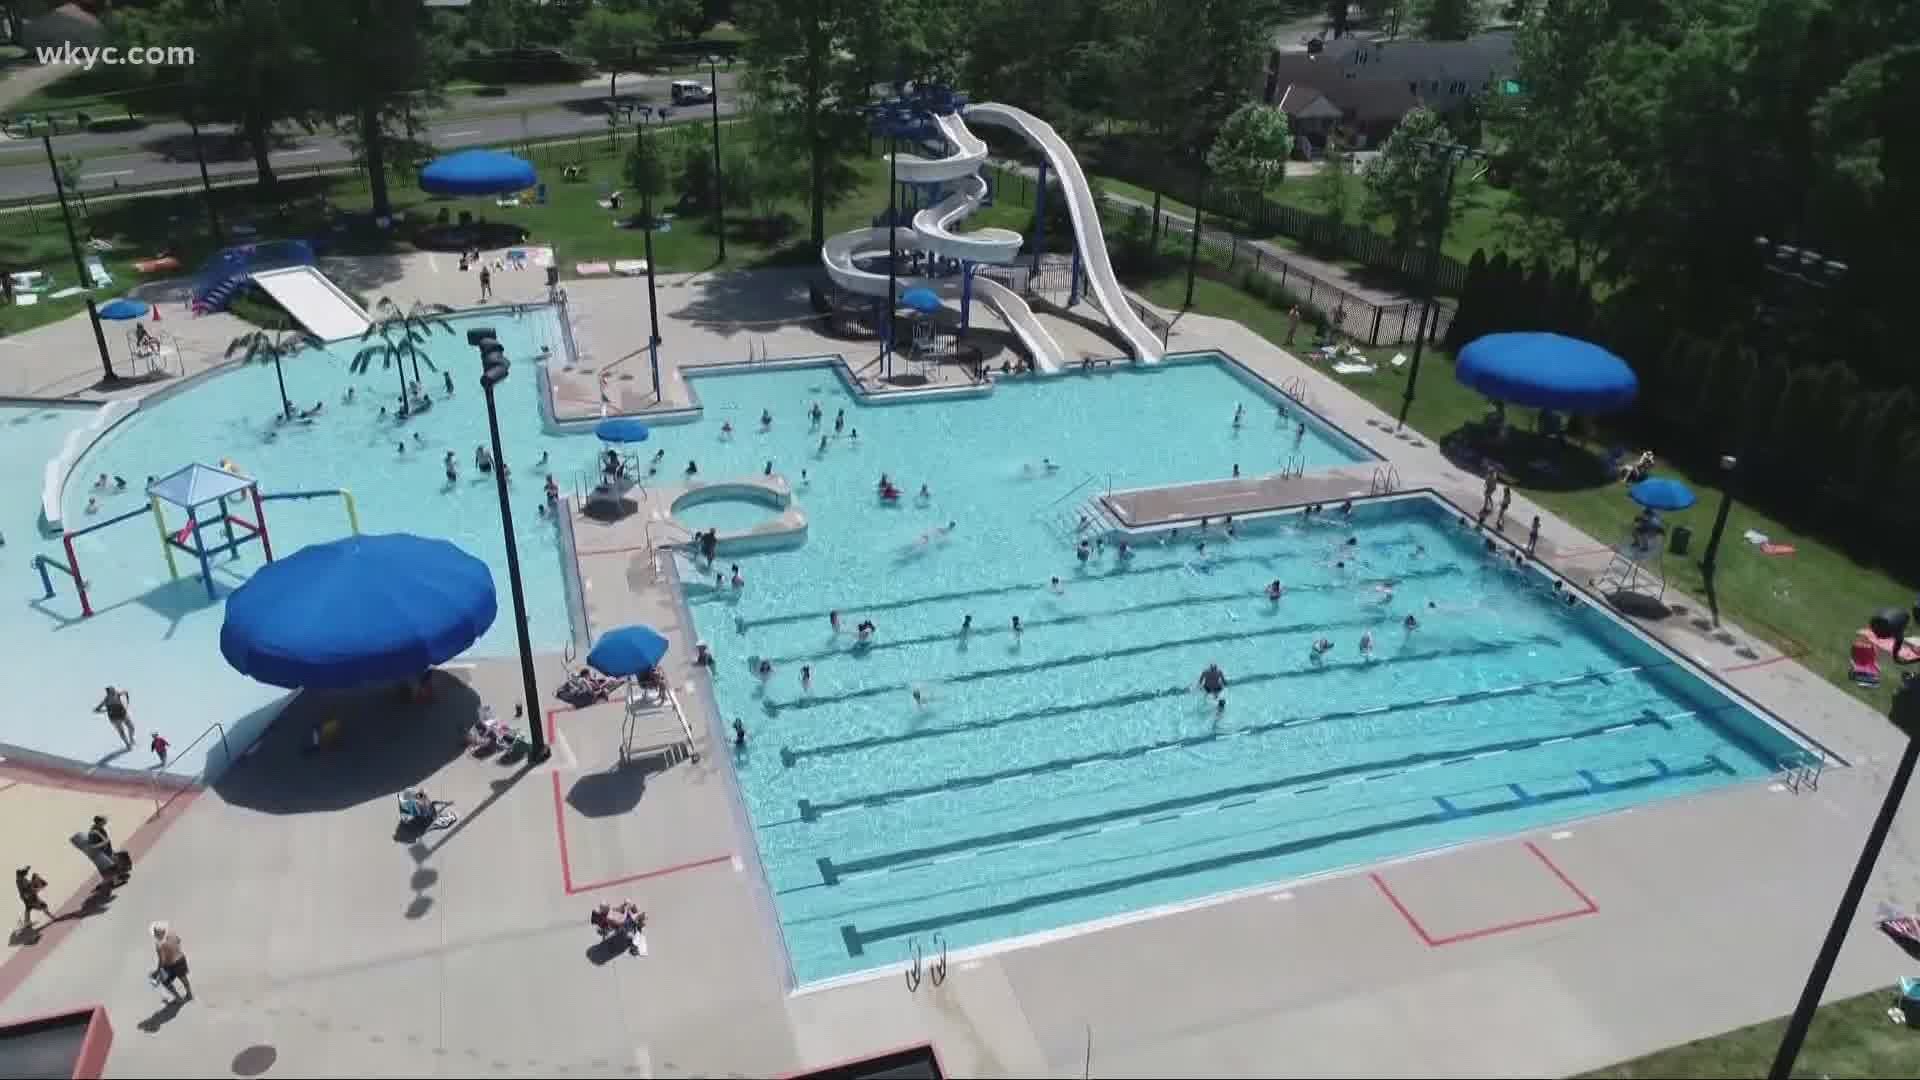 The pool is definitely a great place to go today if you're looking to cool down. I've seen hundreds of people in and out throughout the day. Brandon Simmons reports.